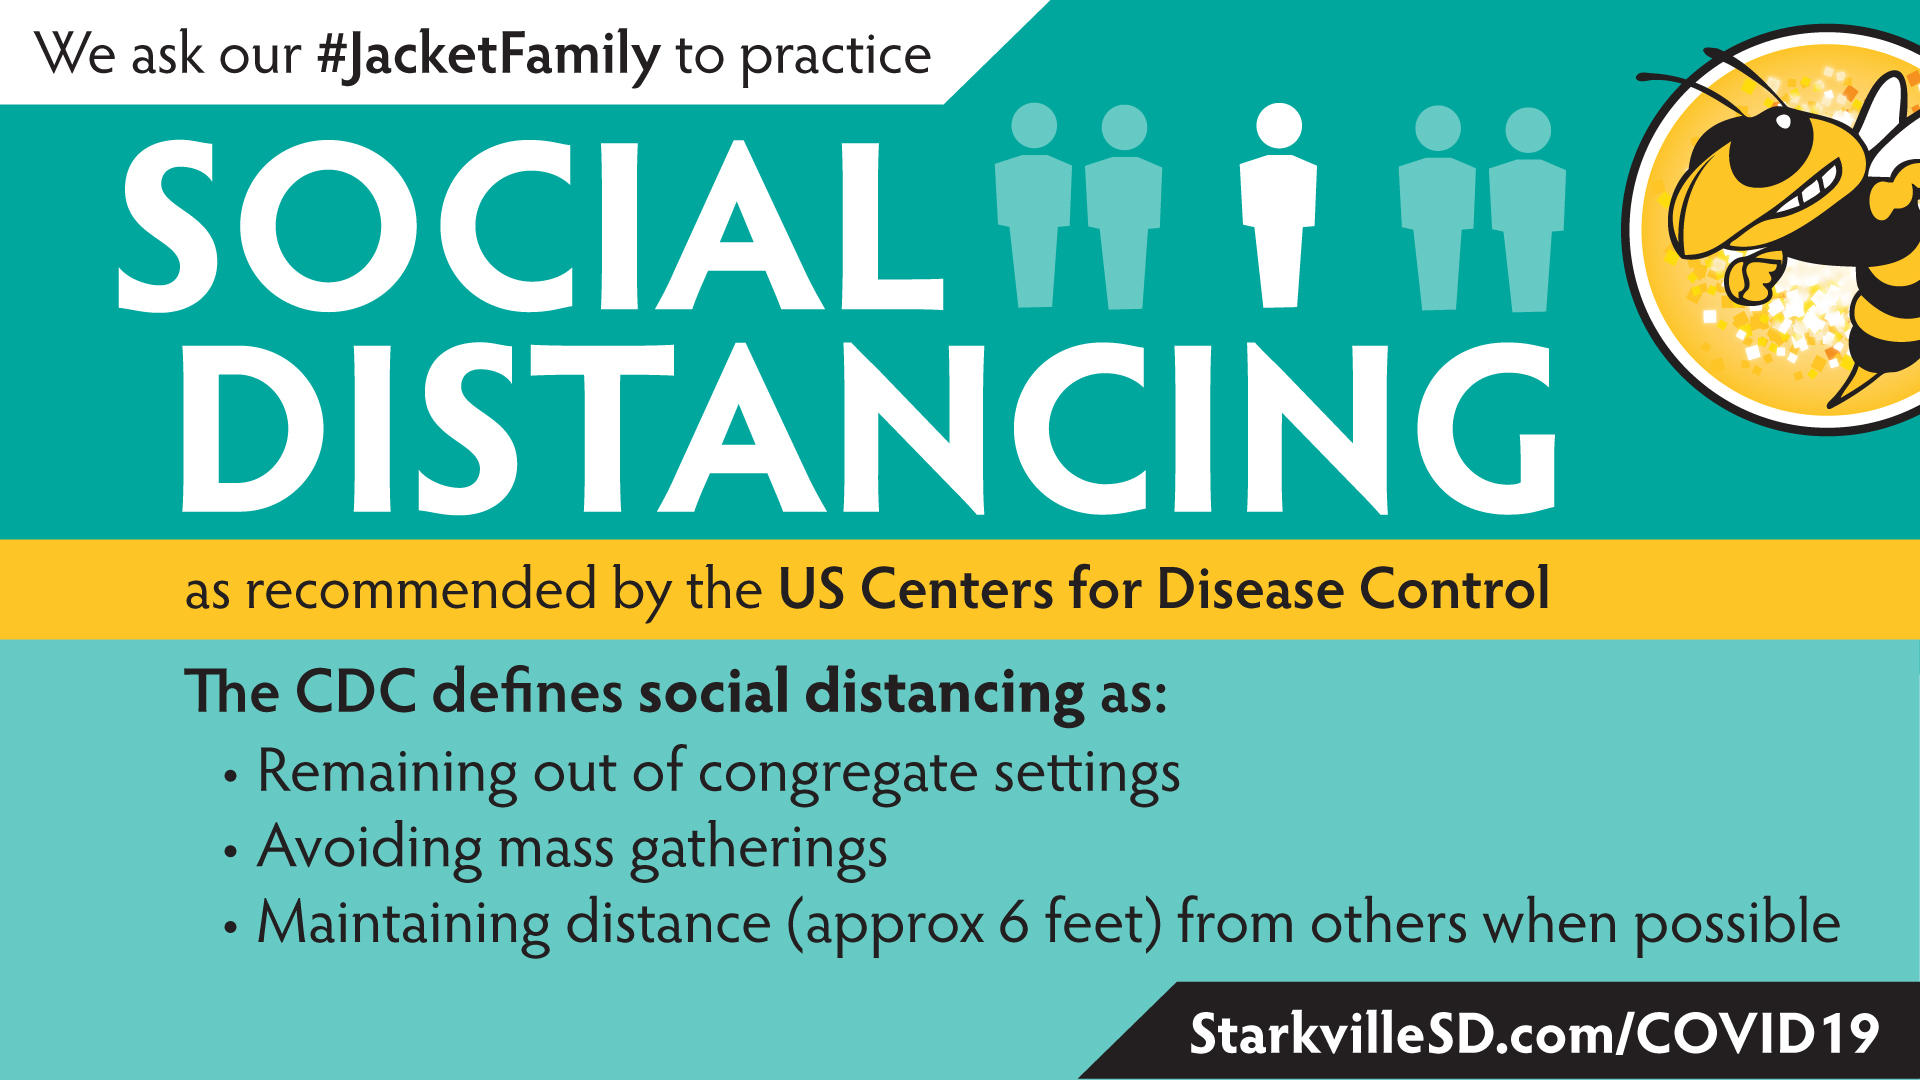 Centers for Disease Control definition of social distancing